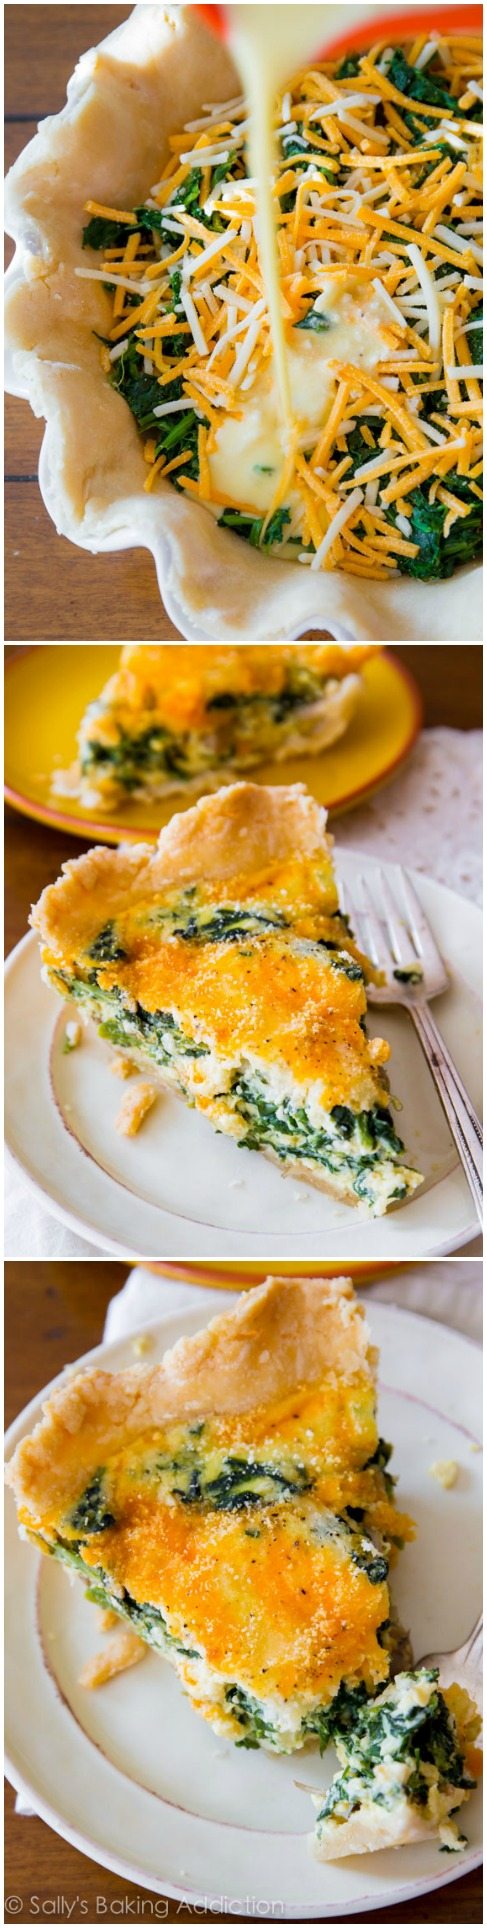 What are some recipes for simple spinach quiche?